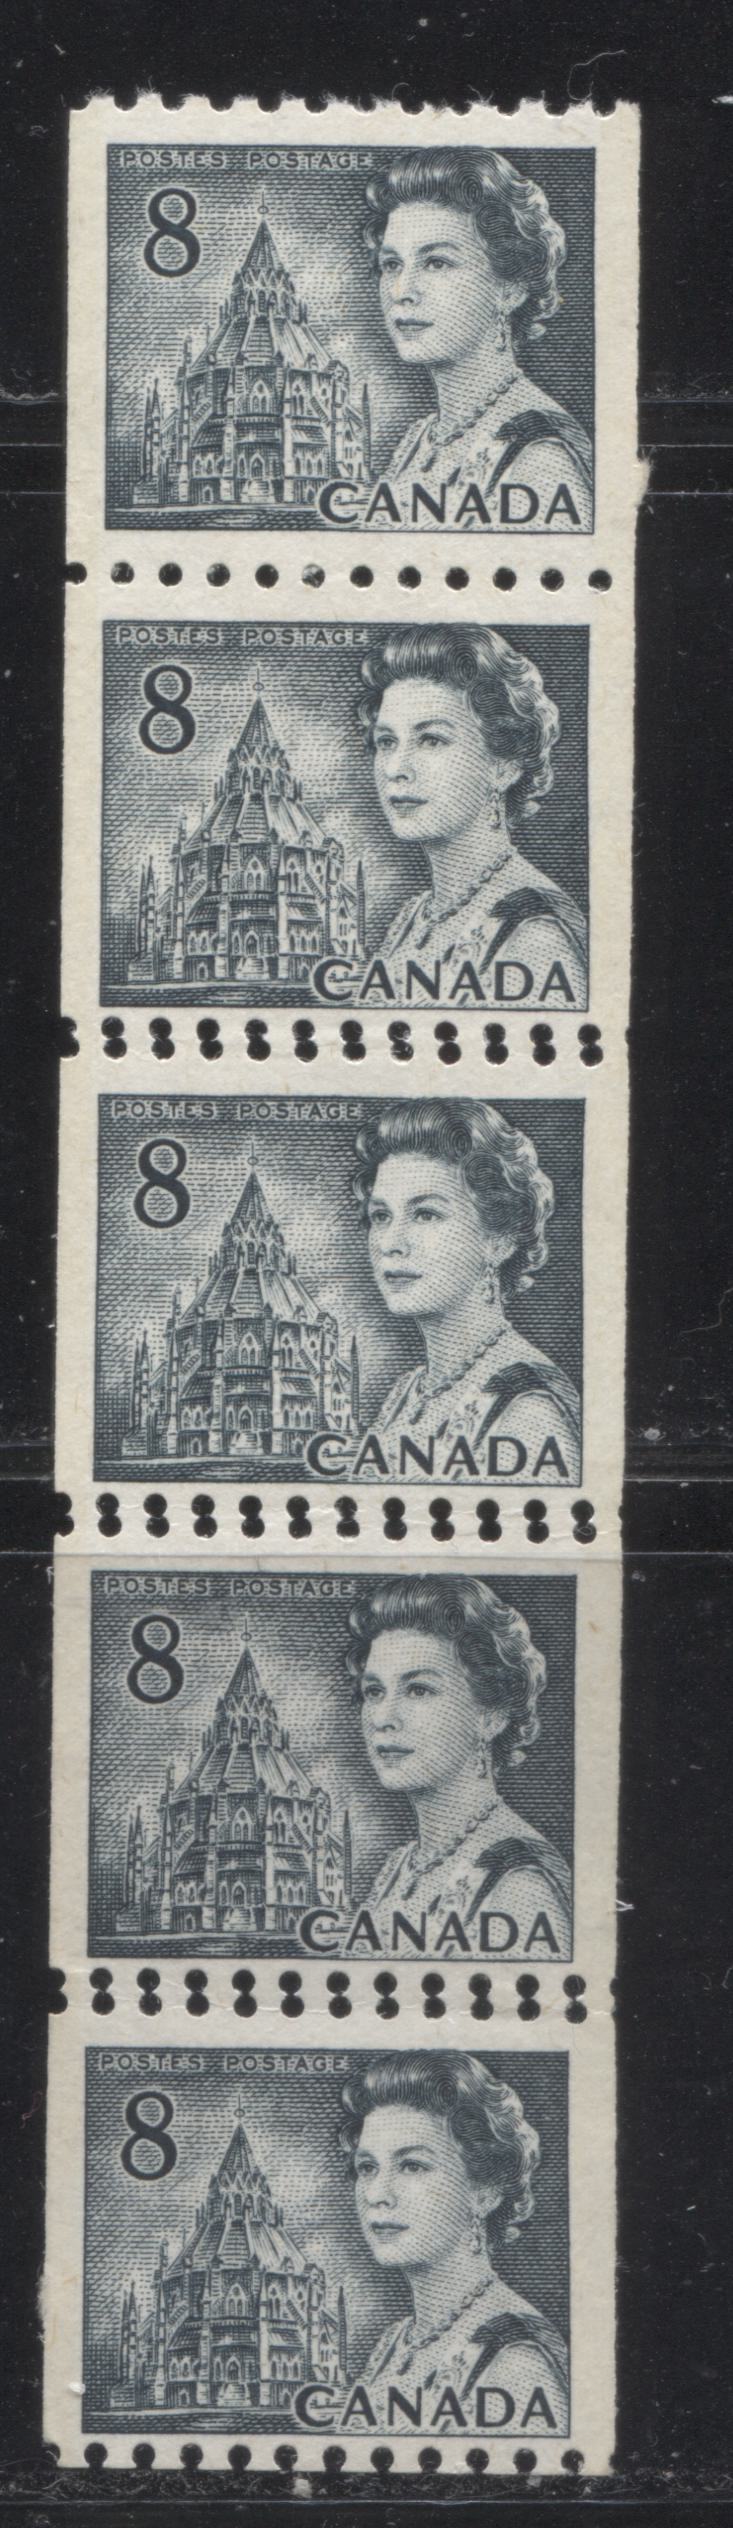 Lot 104 Canada #550p 8c Slate Queen Elizabeth II, 1967-1973 Centennial Issue, A VFNH GT2 Tagged Coil Strip Of 5 On LF-fl Bluish White Vertical Wove Paper With Sparse LF Fibers & Very Sparse Woodpulp Fibres With Satin PVA Gum And Double Perfs